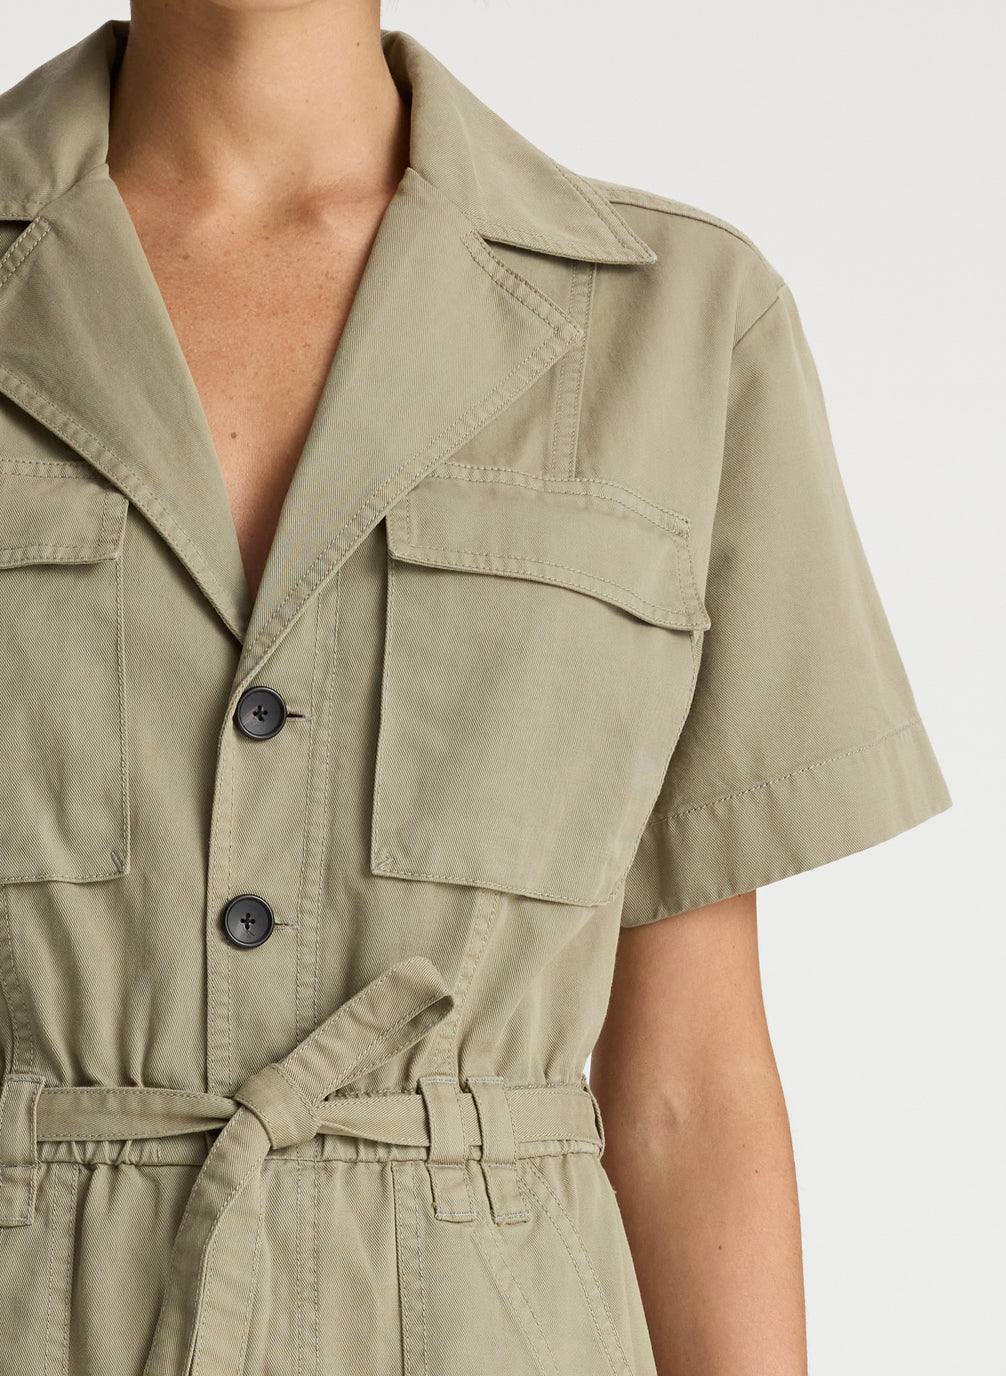 detail view of woman in short sleeve khaki jumpsuit